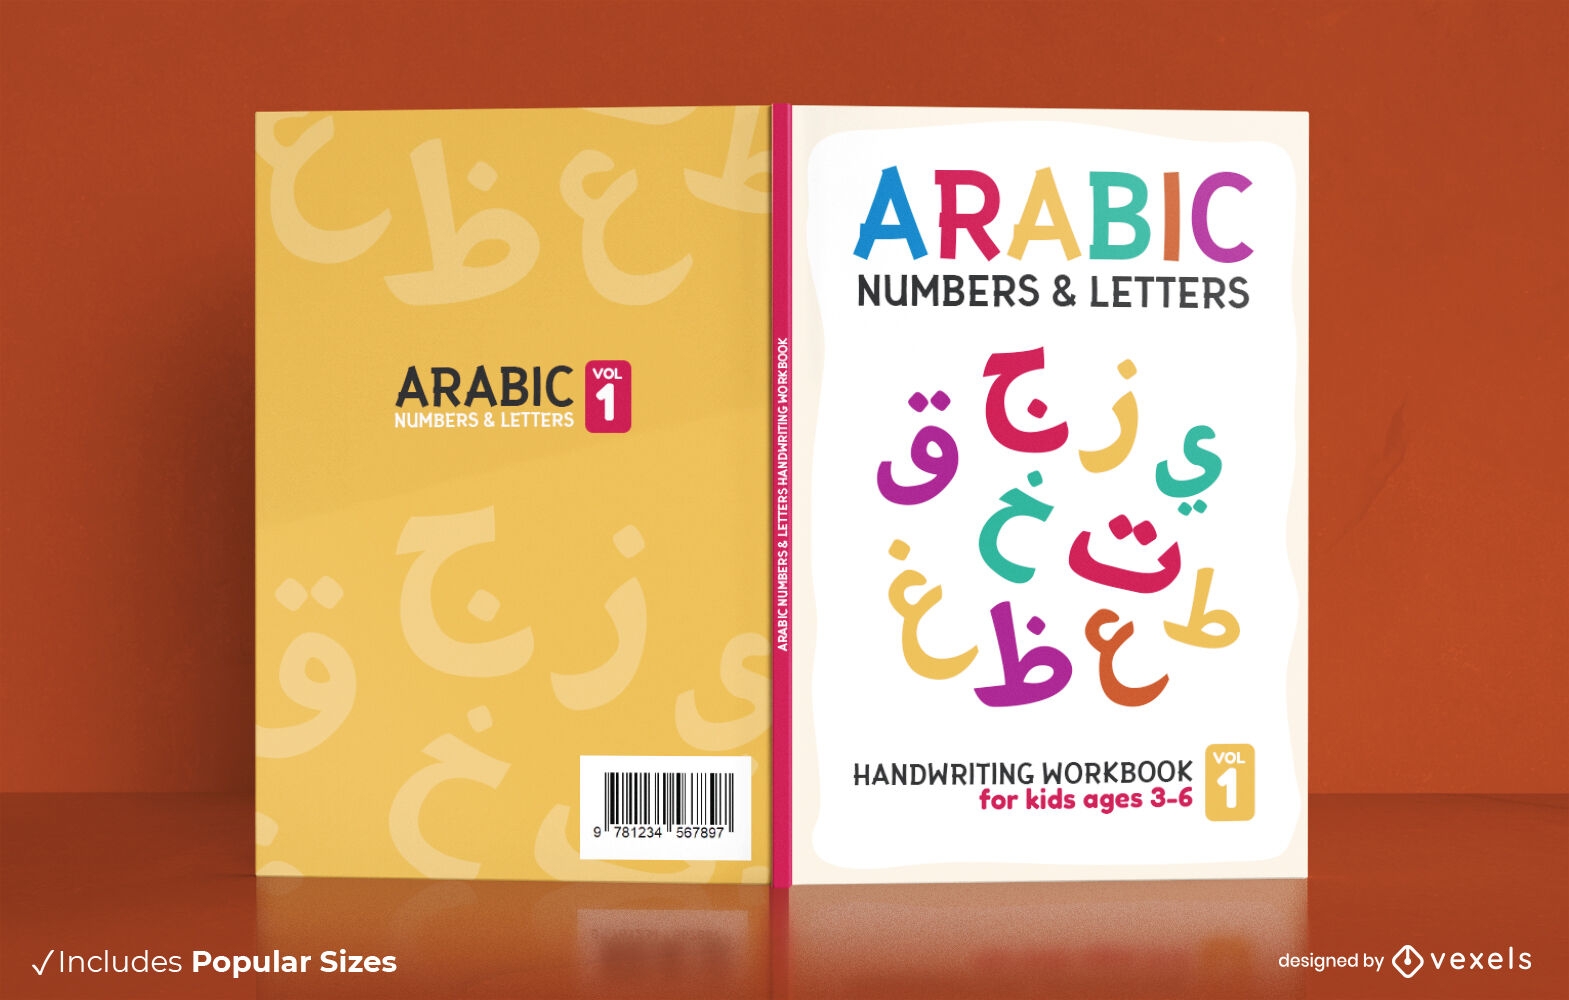 Arabic numbers and letters Book cover design